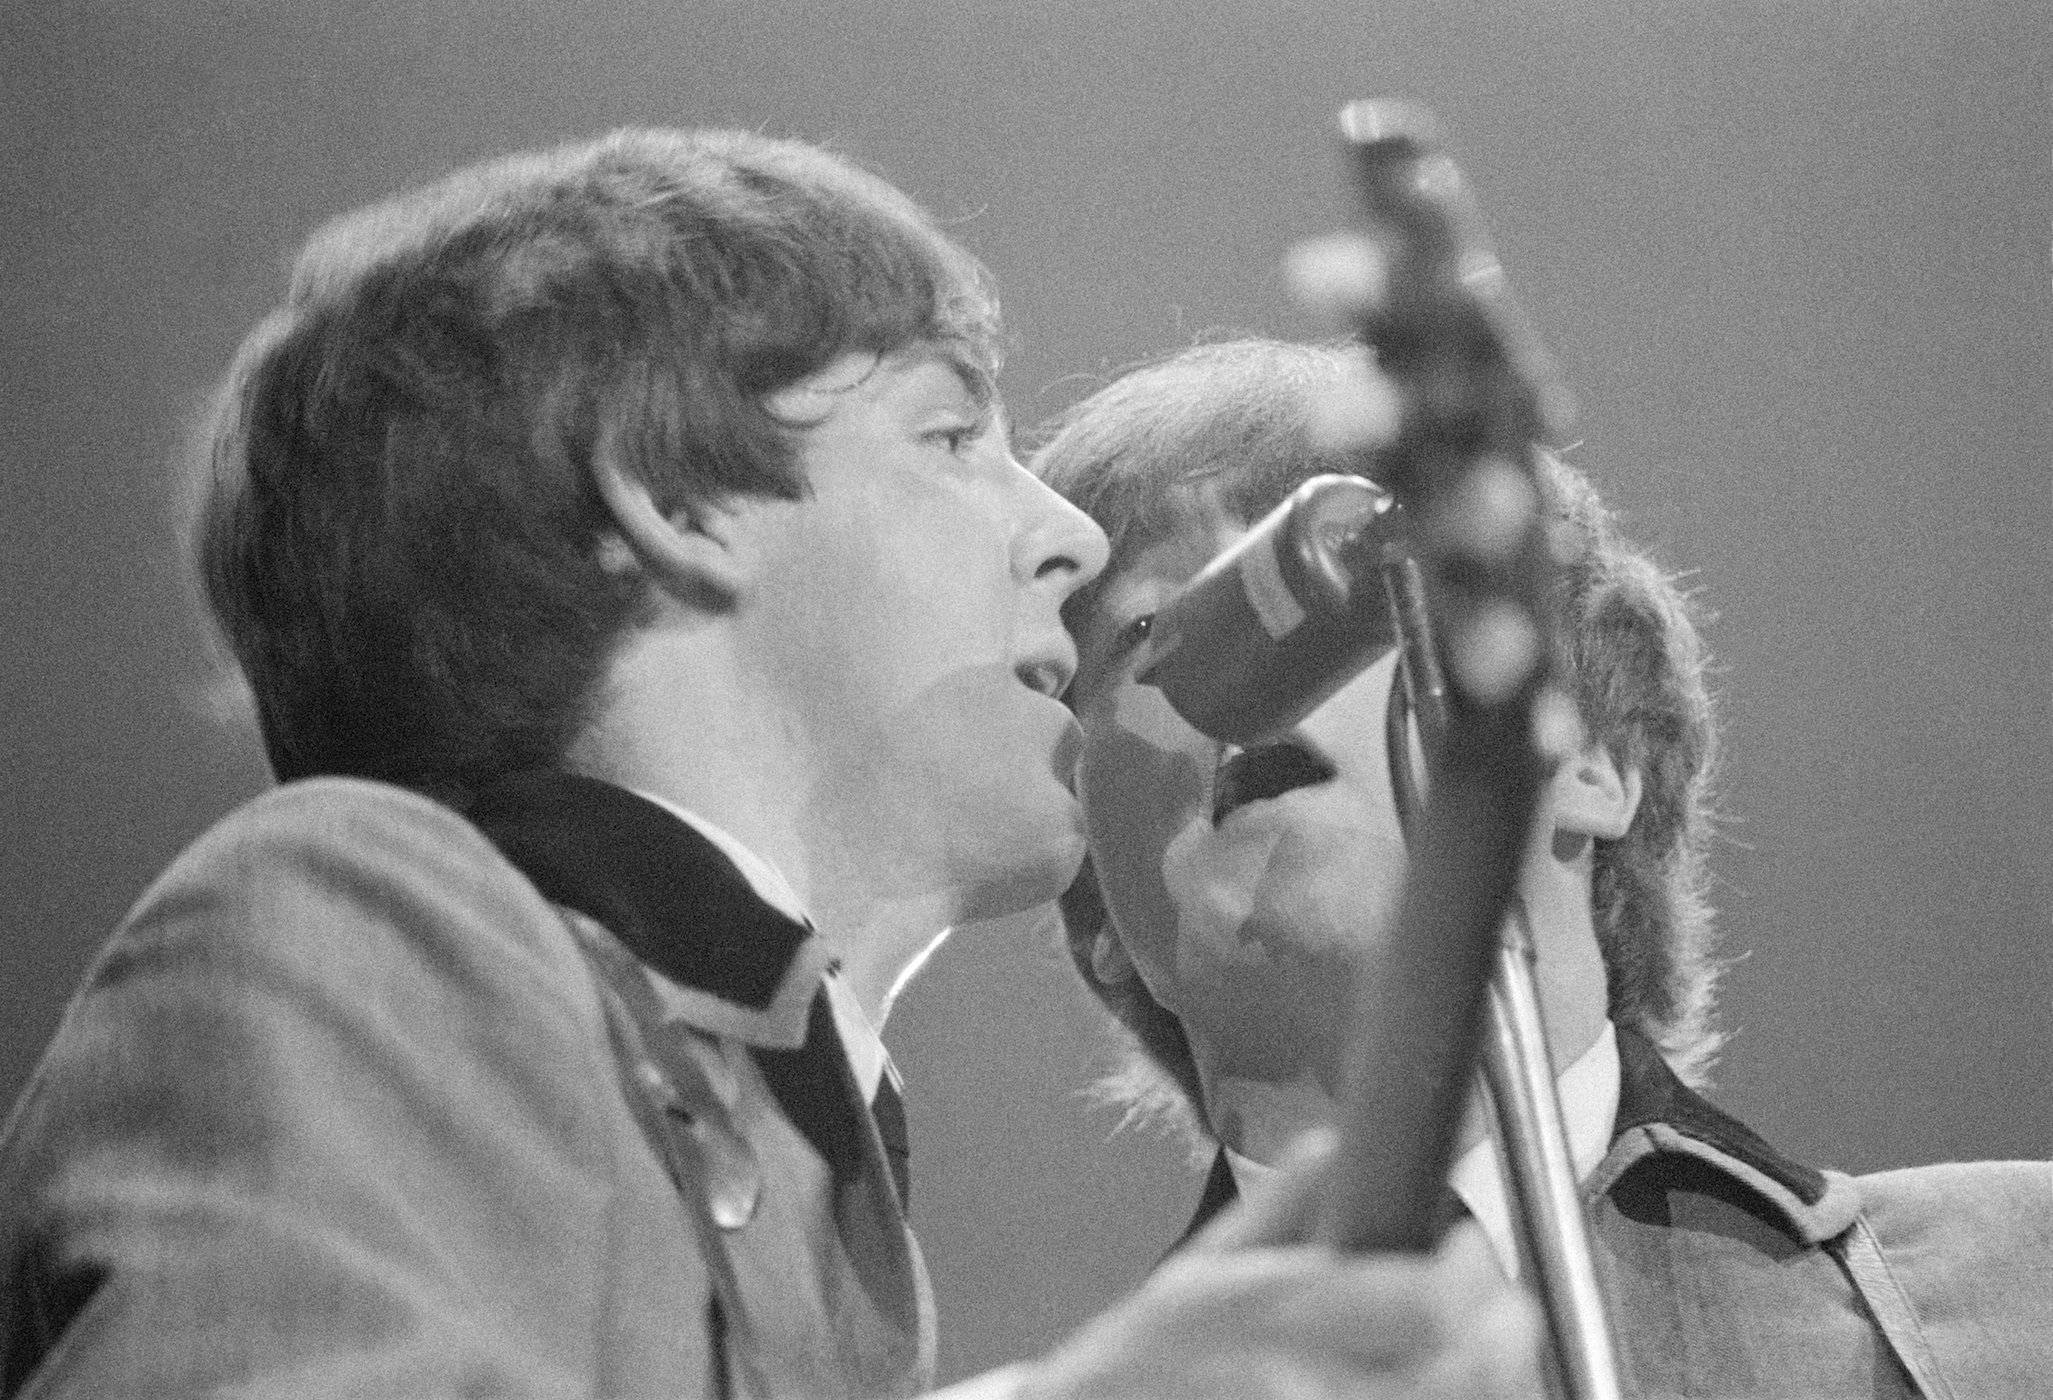 The Beatles Song that Paul McCartney Would Say Is His Favorite ‘if Pushed’